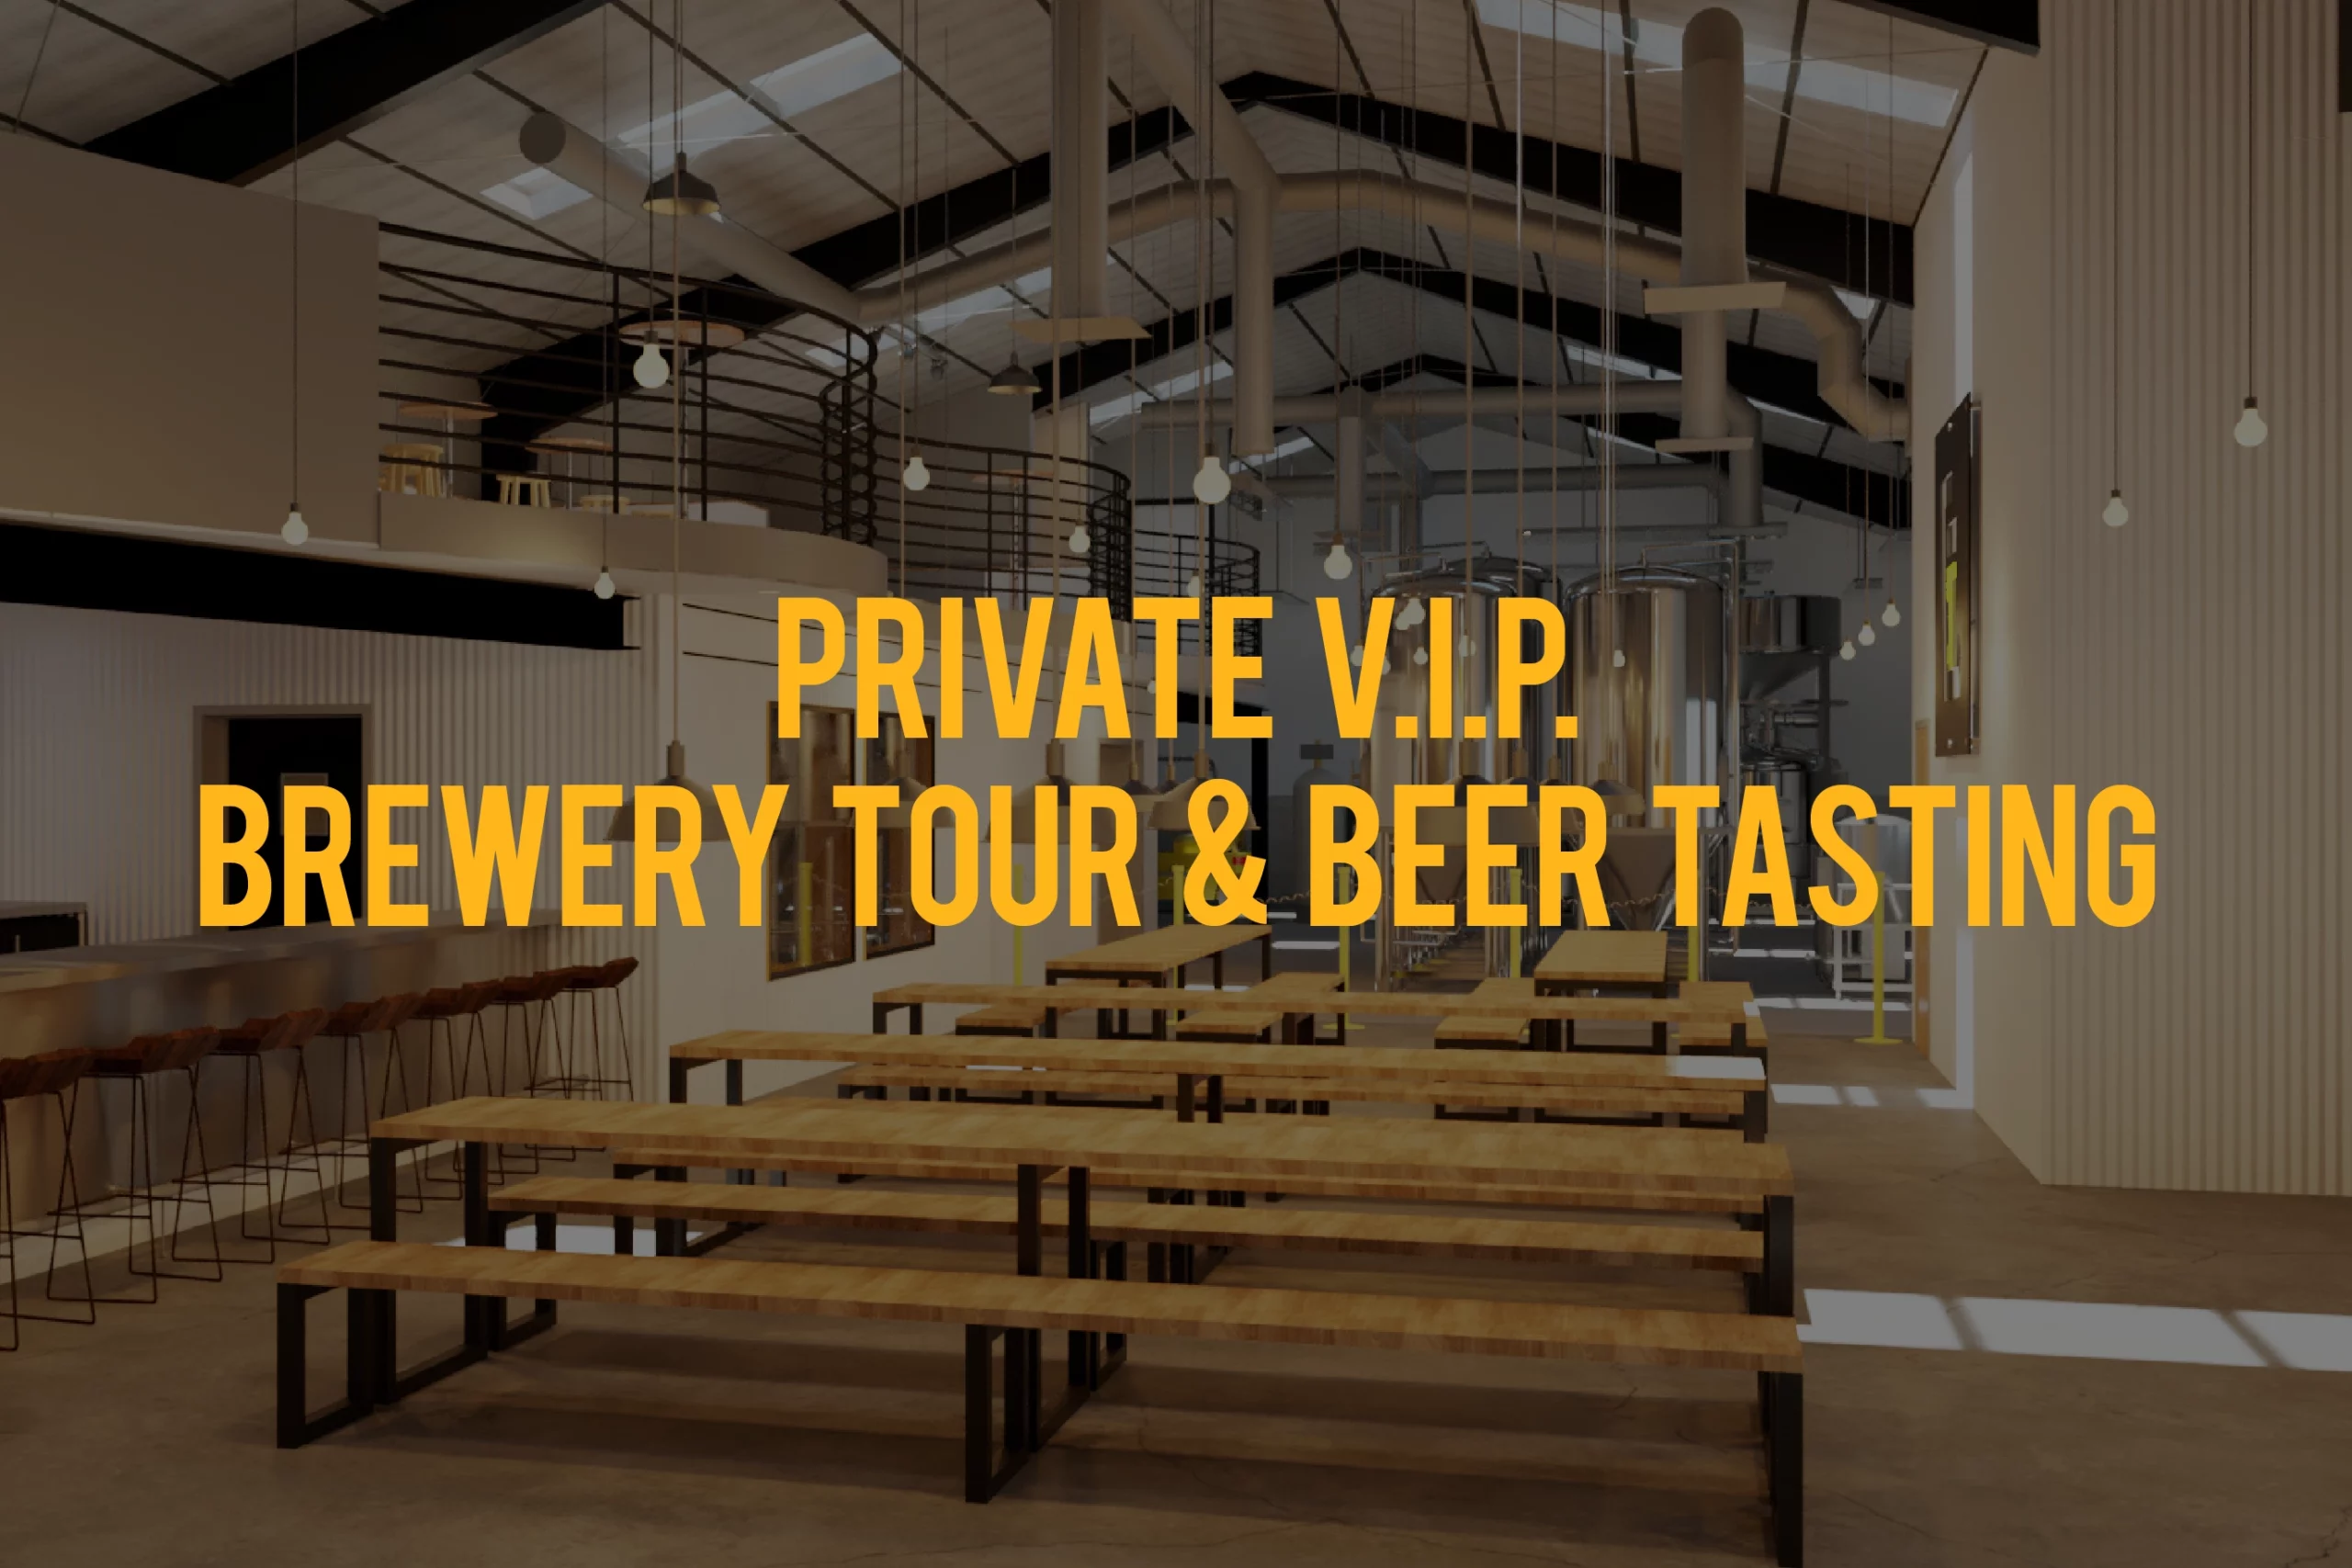 payment-provider-for-vip-brewery-access-in-india